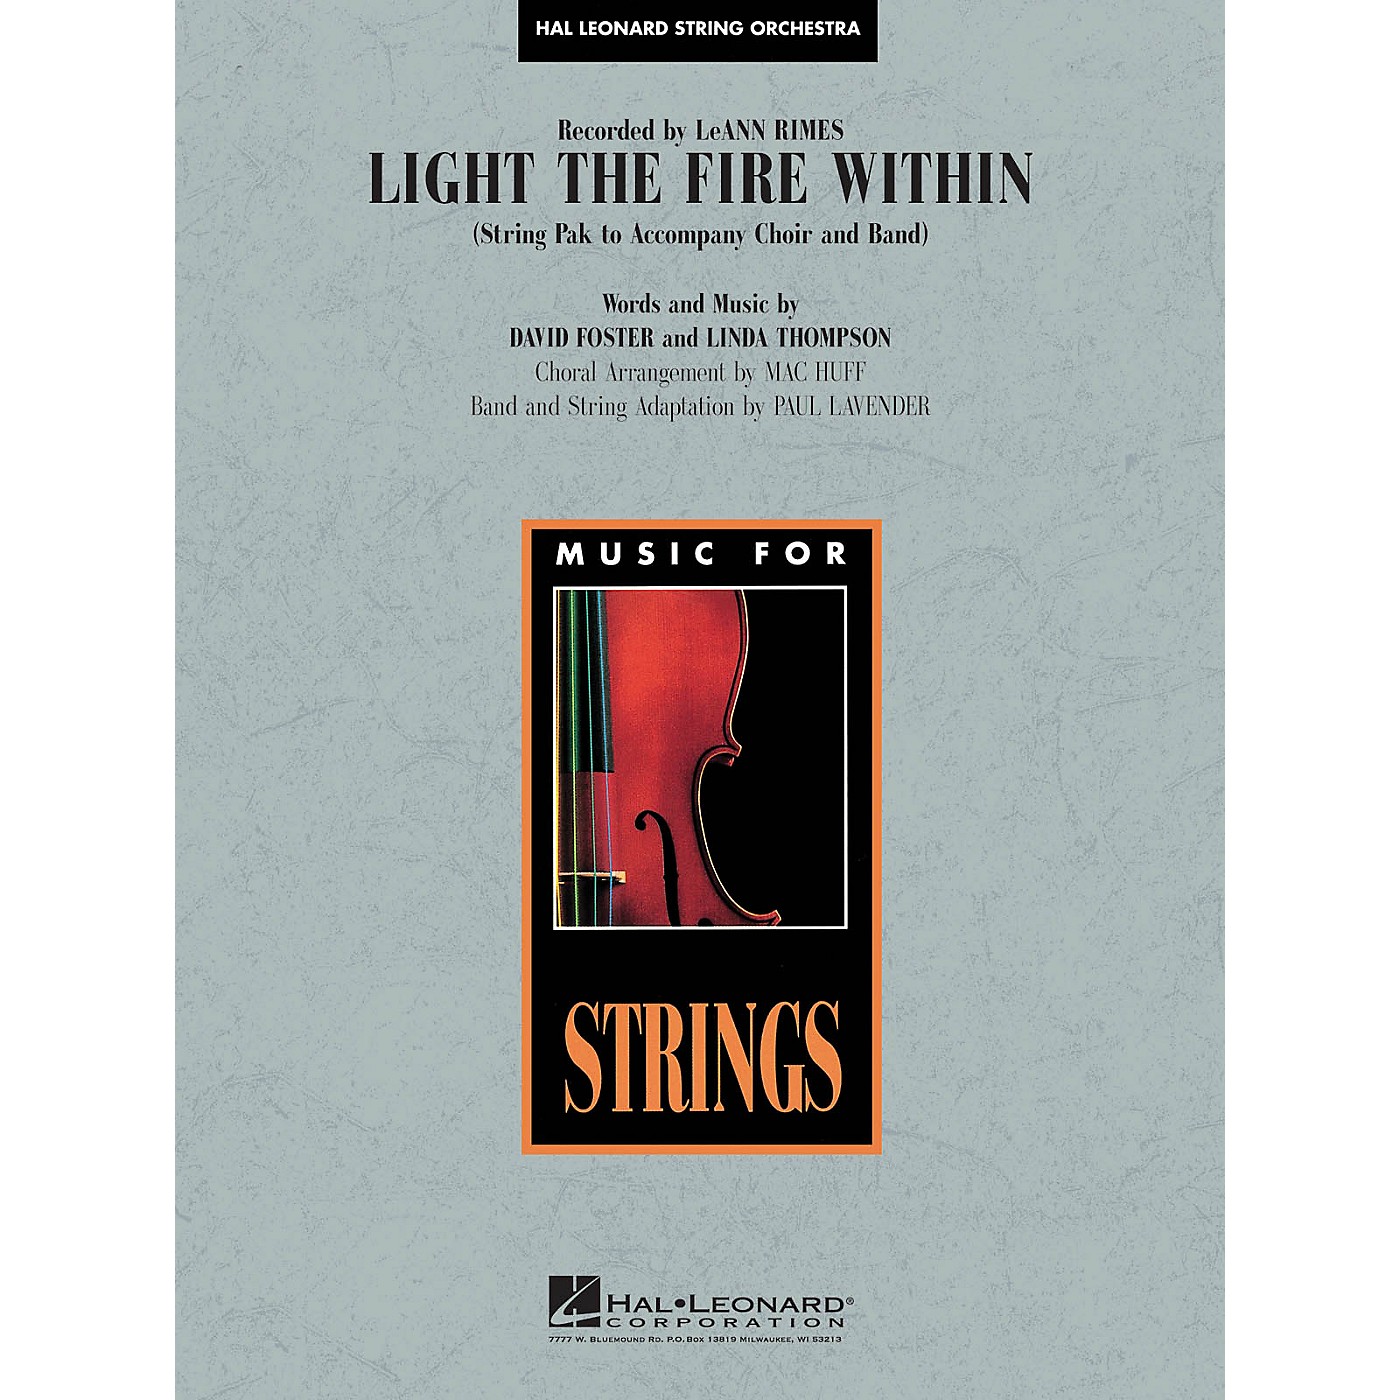 Hal Leonard Light the Fire Within Music for String Orchestra Series by Lee Ann Rimes Arranged by Paul Lavender thumbnail